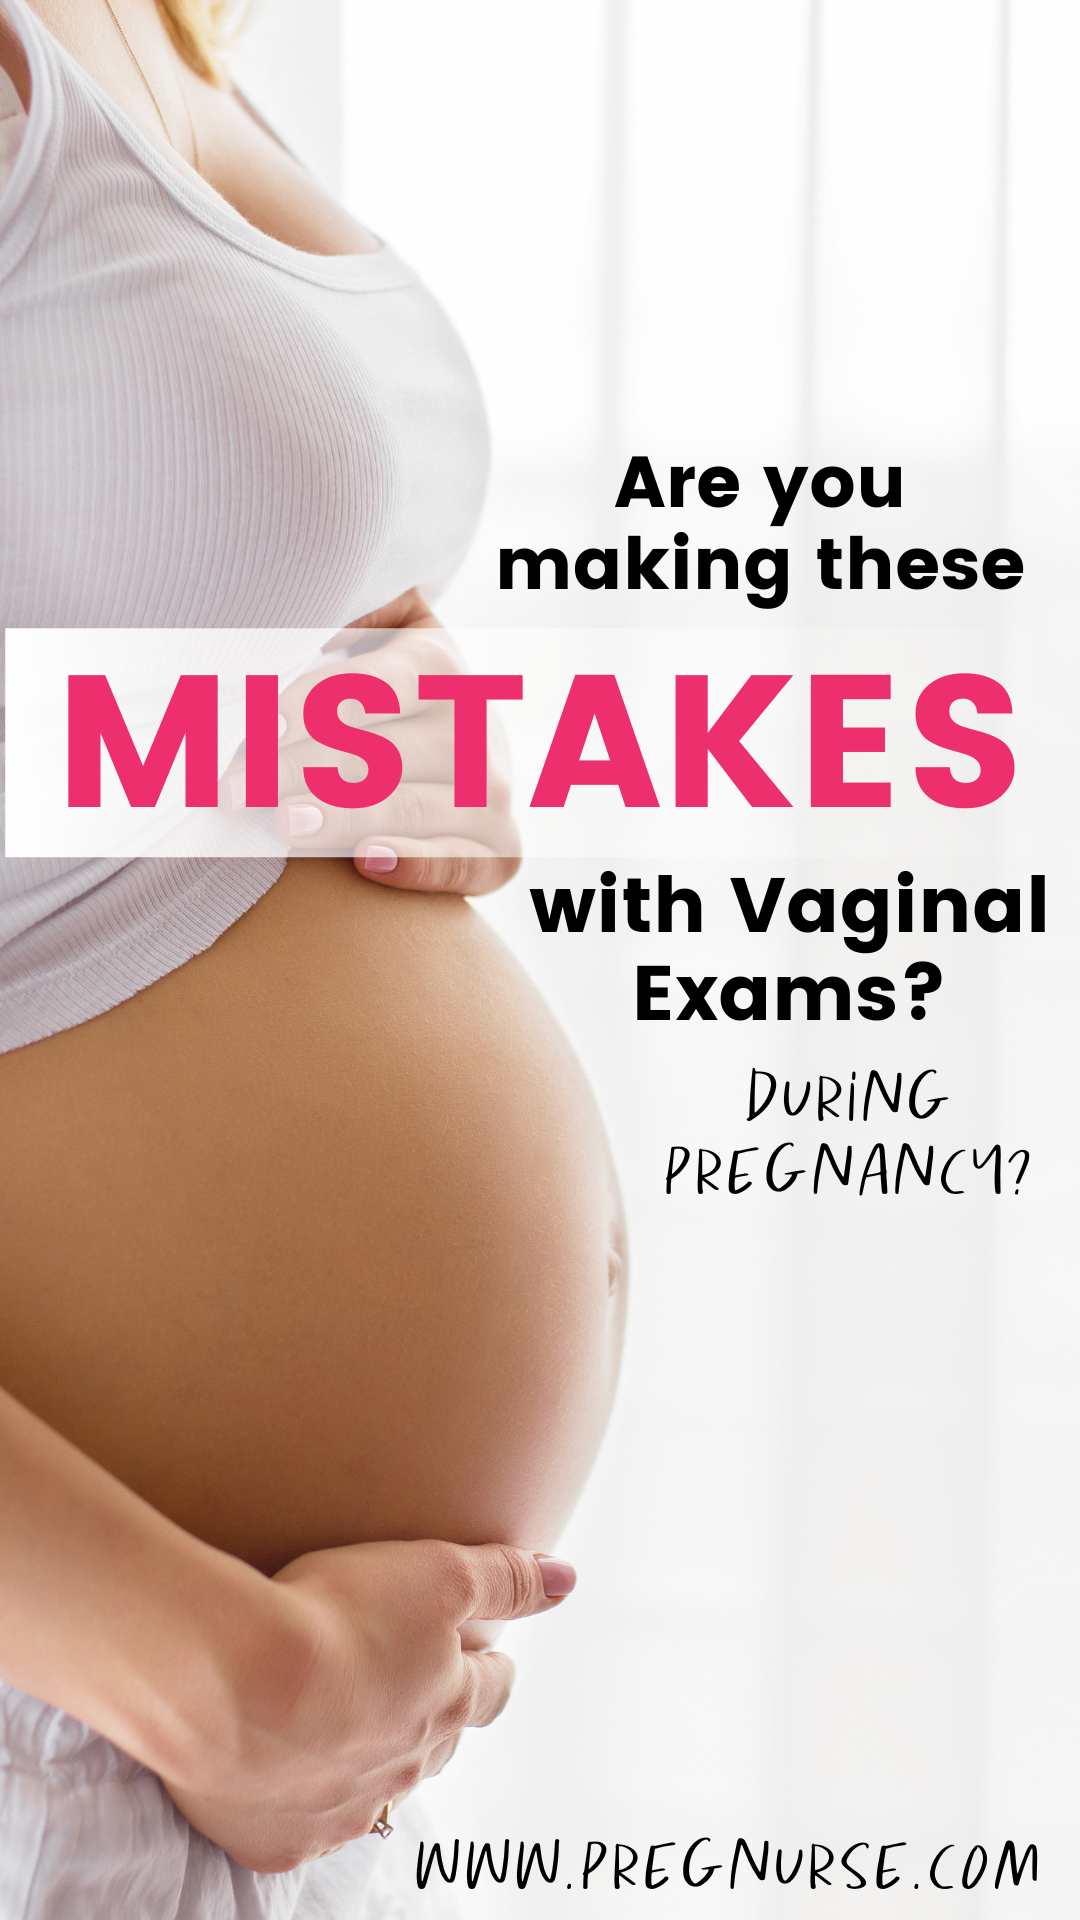 Cervical checks or vaginal exams can be painful and sometimes unnecessary. Today I want to talk about if you can refuse them and the consequences that might happen.